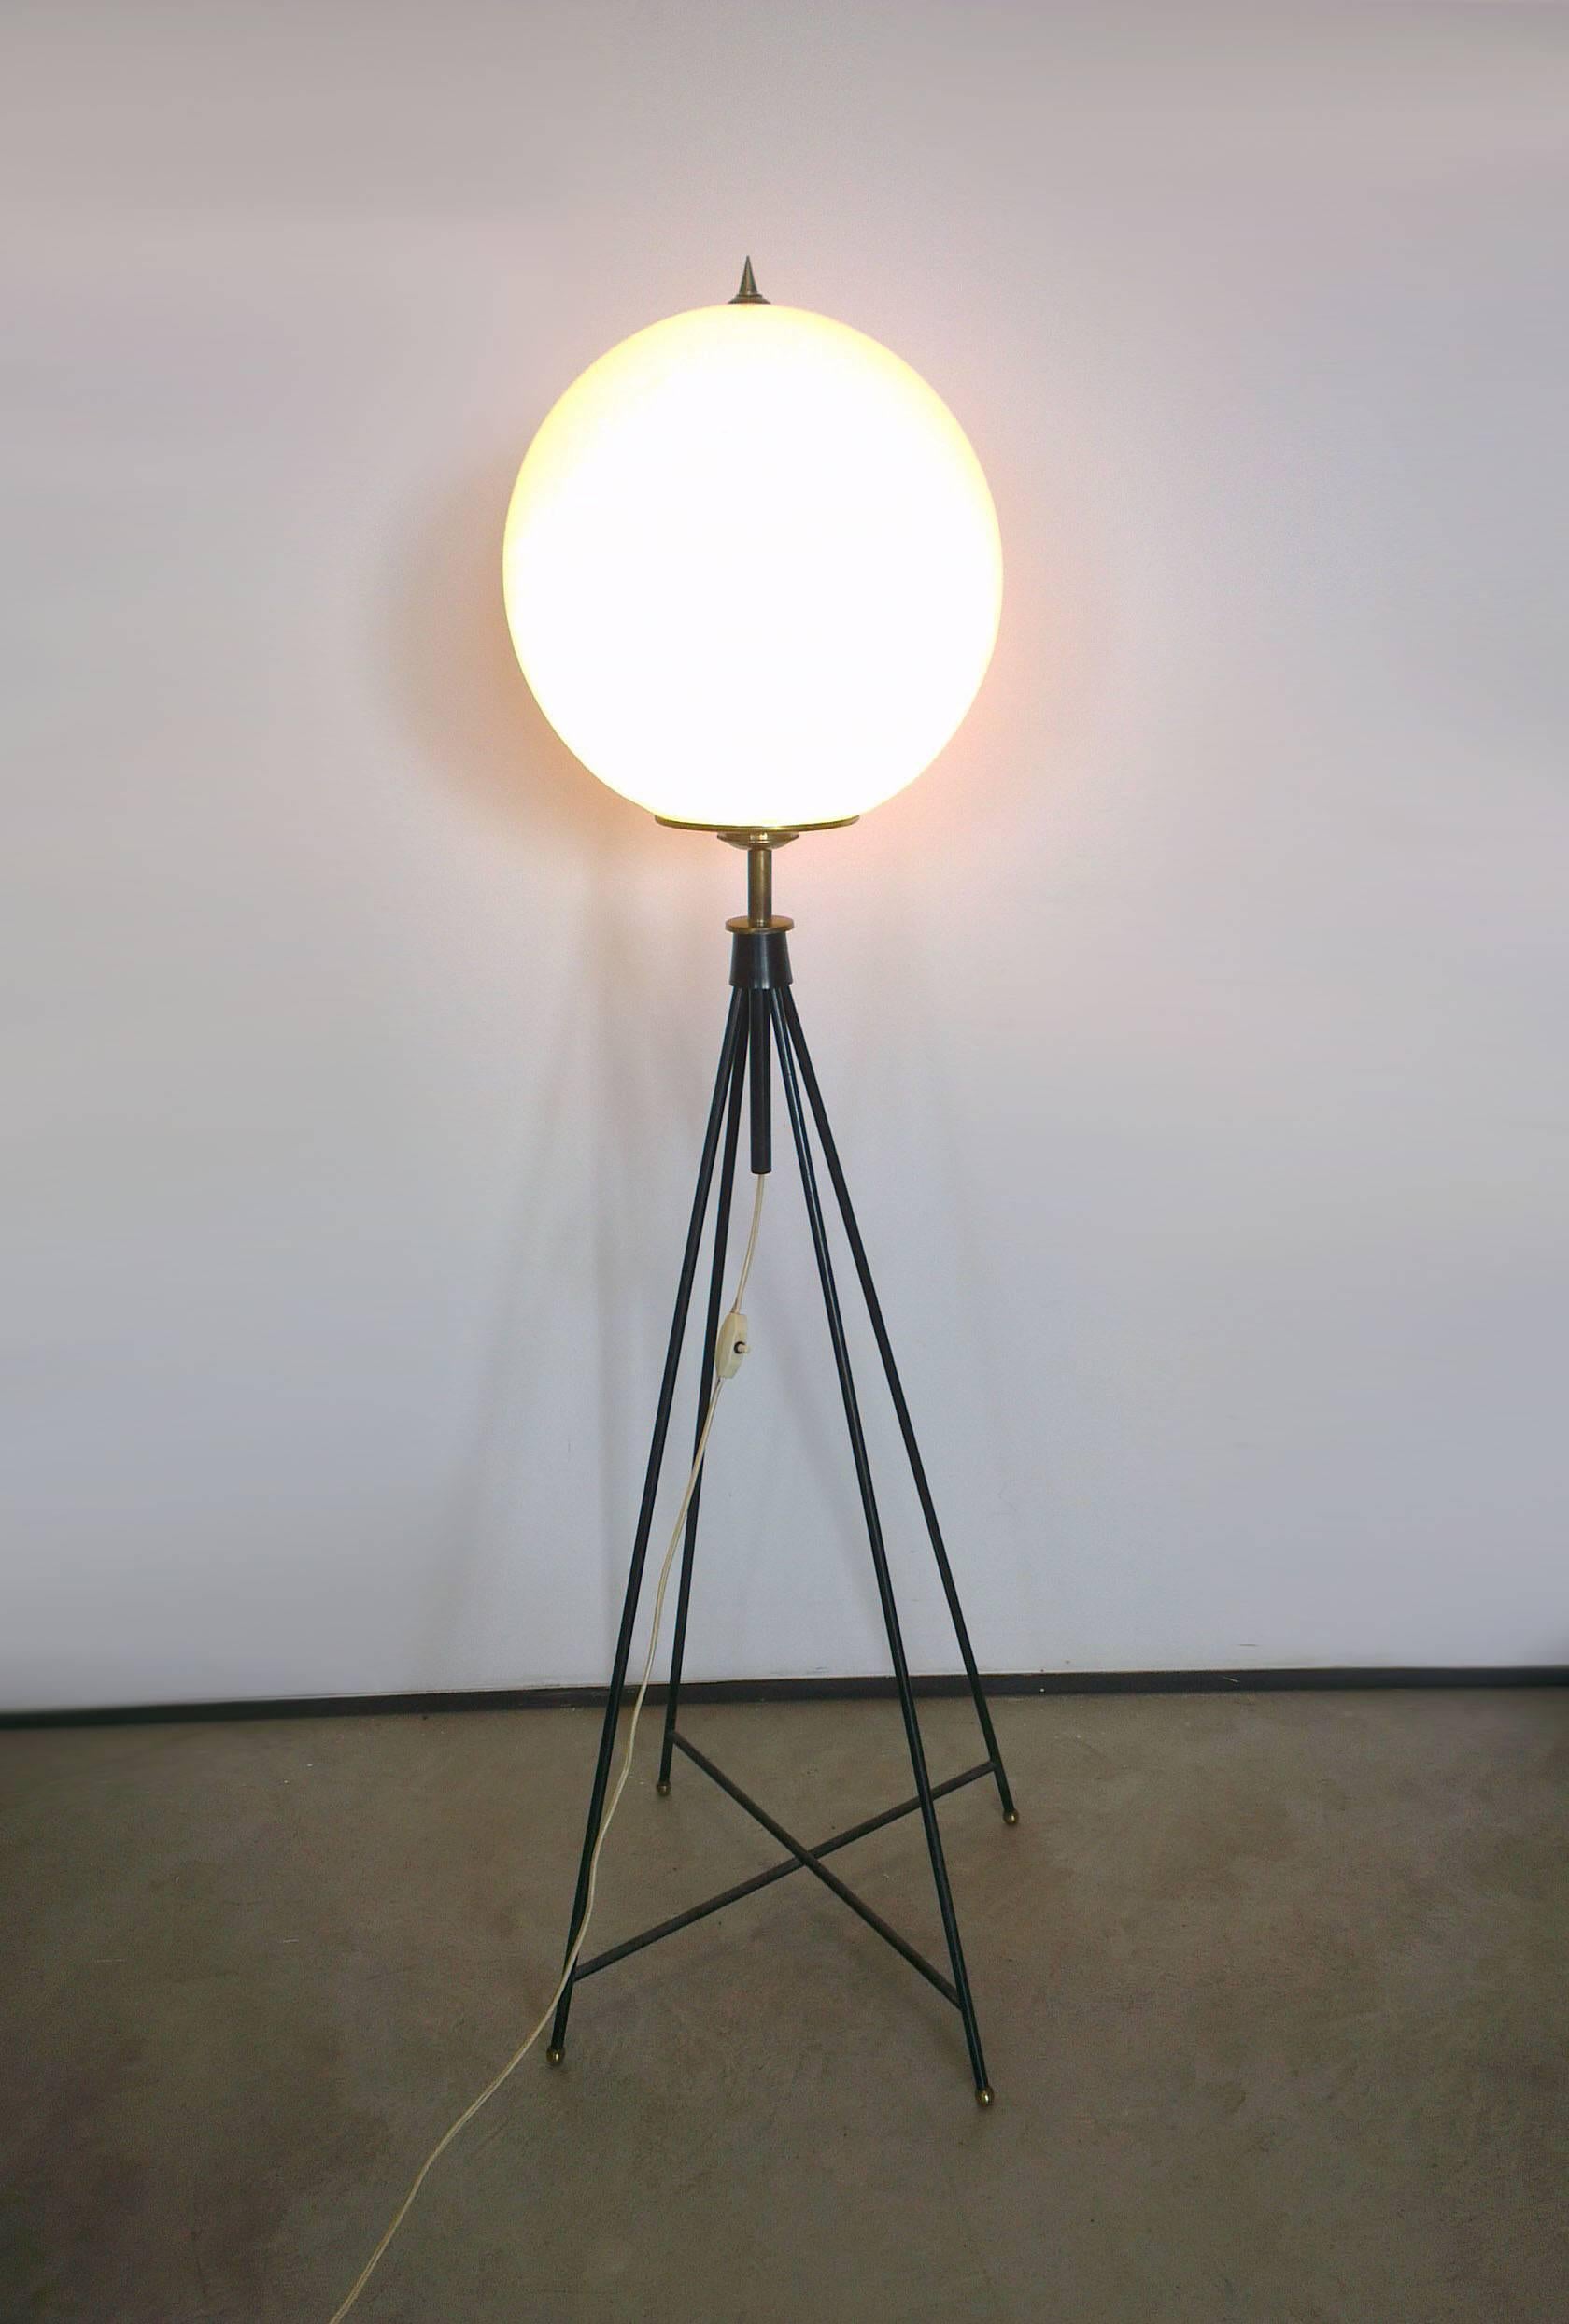 Elegant floor lamp by Stilnovo, 1950.
Four black lacquered brass stems are linked at the base by a crossbeam and are surmounted by a large opaline glass ball as diffuser.
The wire system is outside the structure and its functioning.
Made by